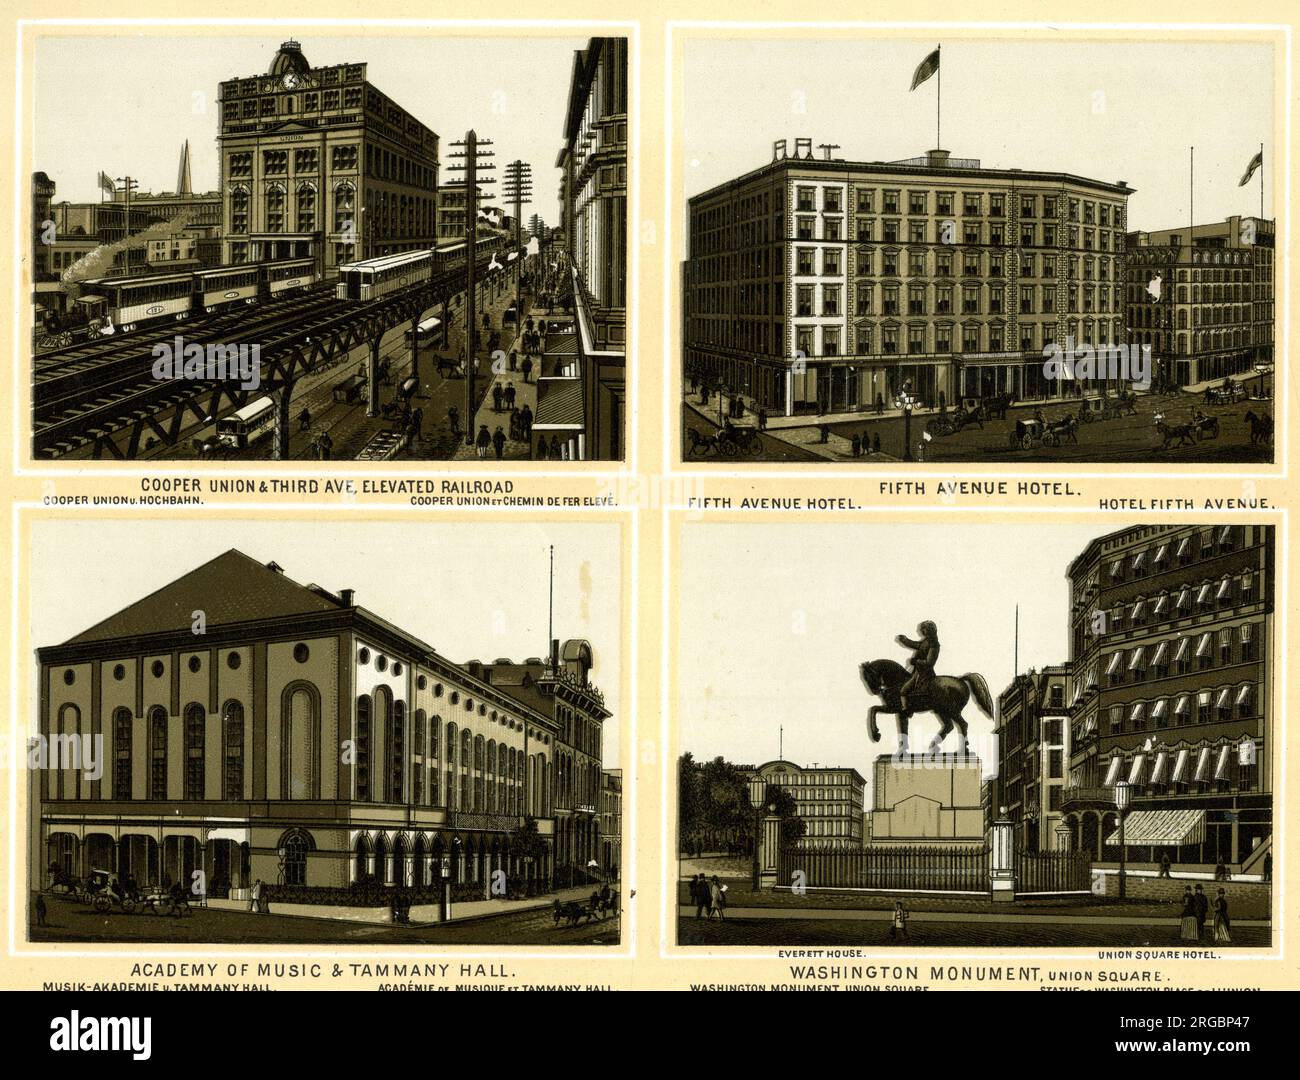 Four views of New York City, USA - Elevated Railway, Cooper Union and Third Avenue; Fifth Avenue Hotel; Academy of Music and Tammany Hall; Washington Monument, Union Square Stock Photo